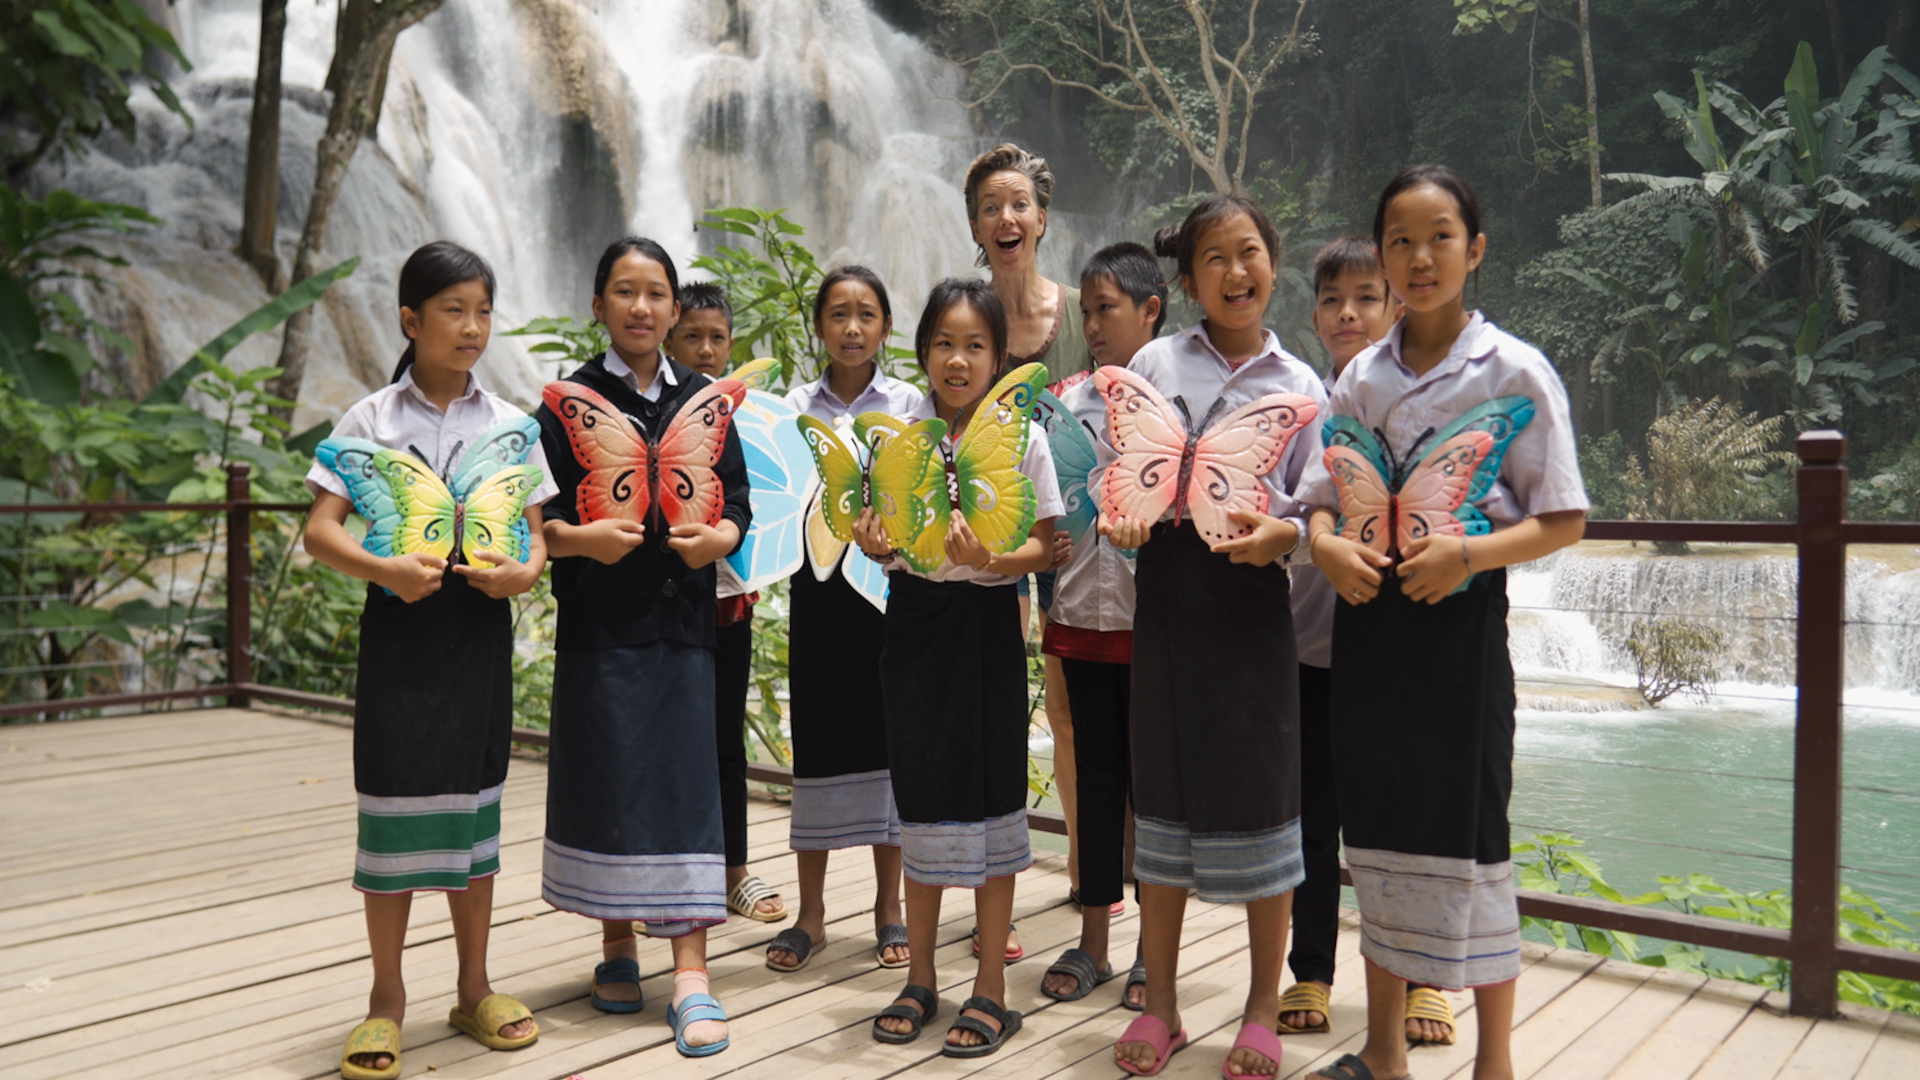 School children from the children's charity, Butterfly Park Luang Prabang Laos